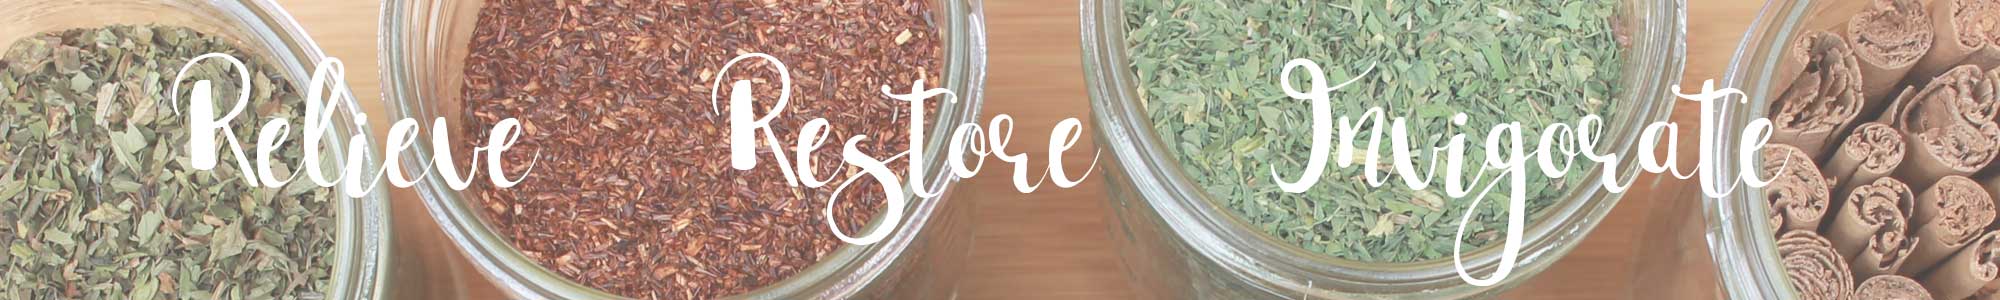 Herbal consultation banner image relieve restore invigorate your body holistically